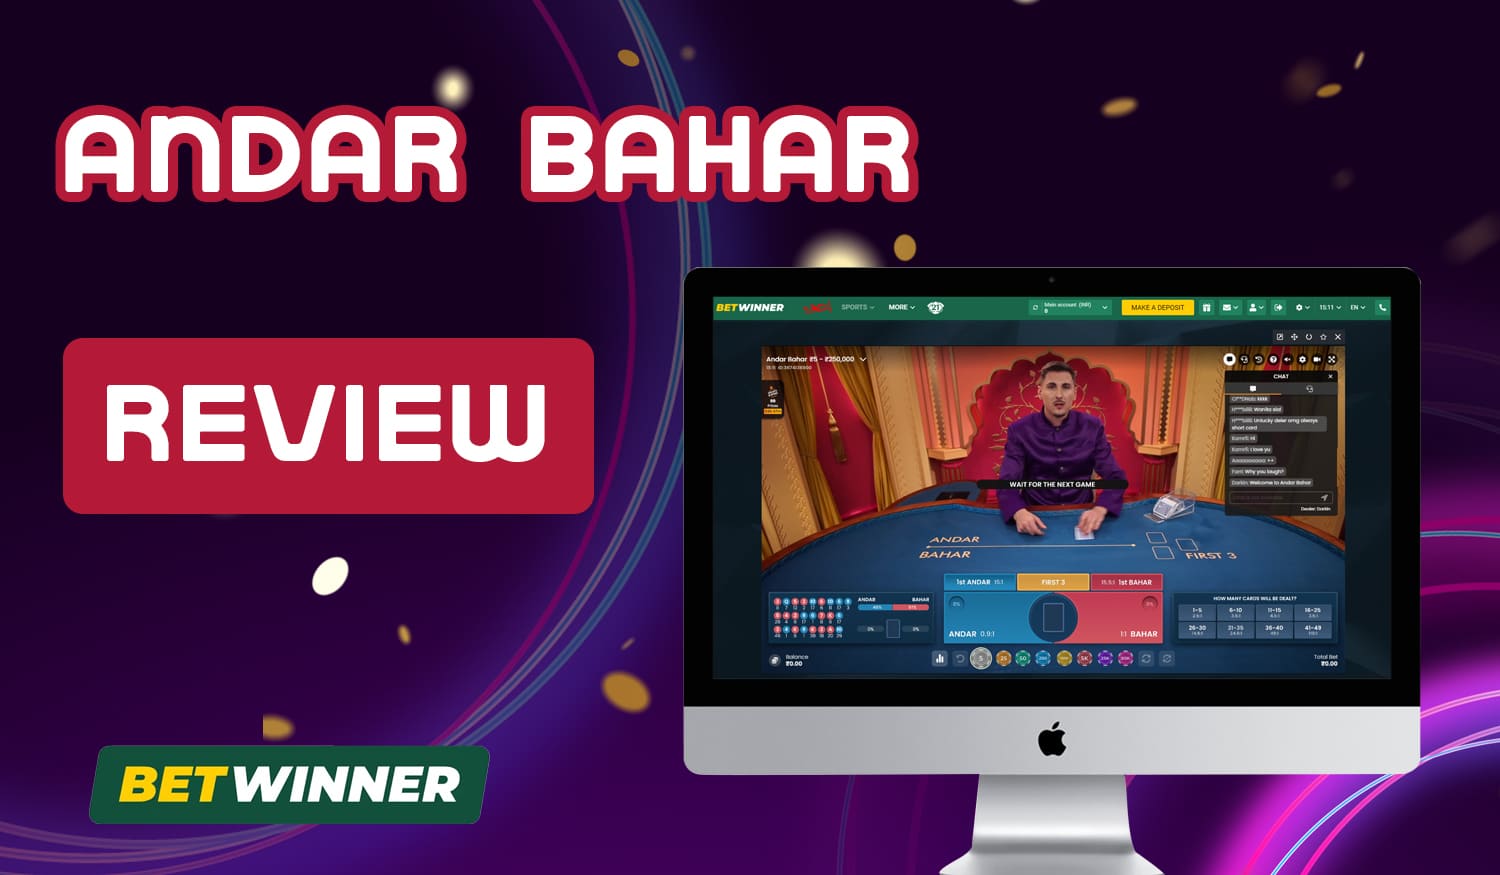 Basic rules and tricks to successfully play Andar Bahar at BetWinner